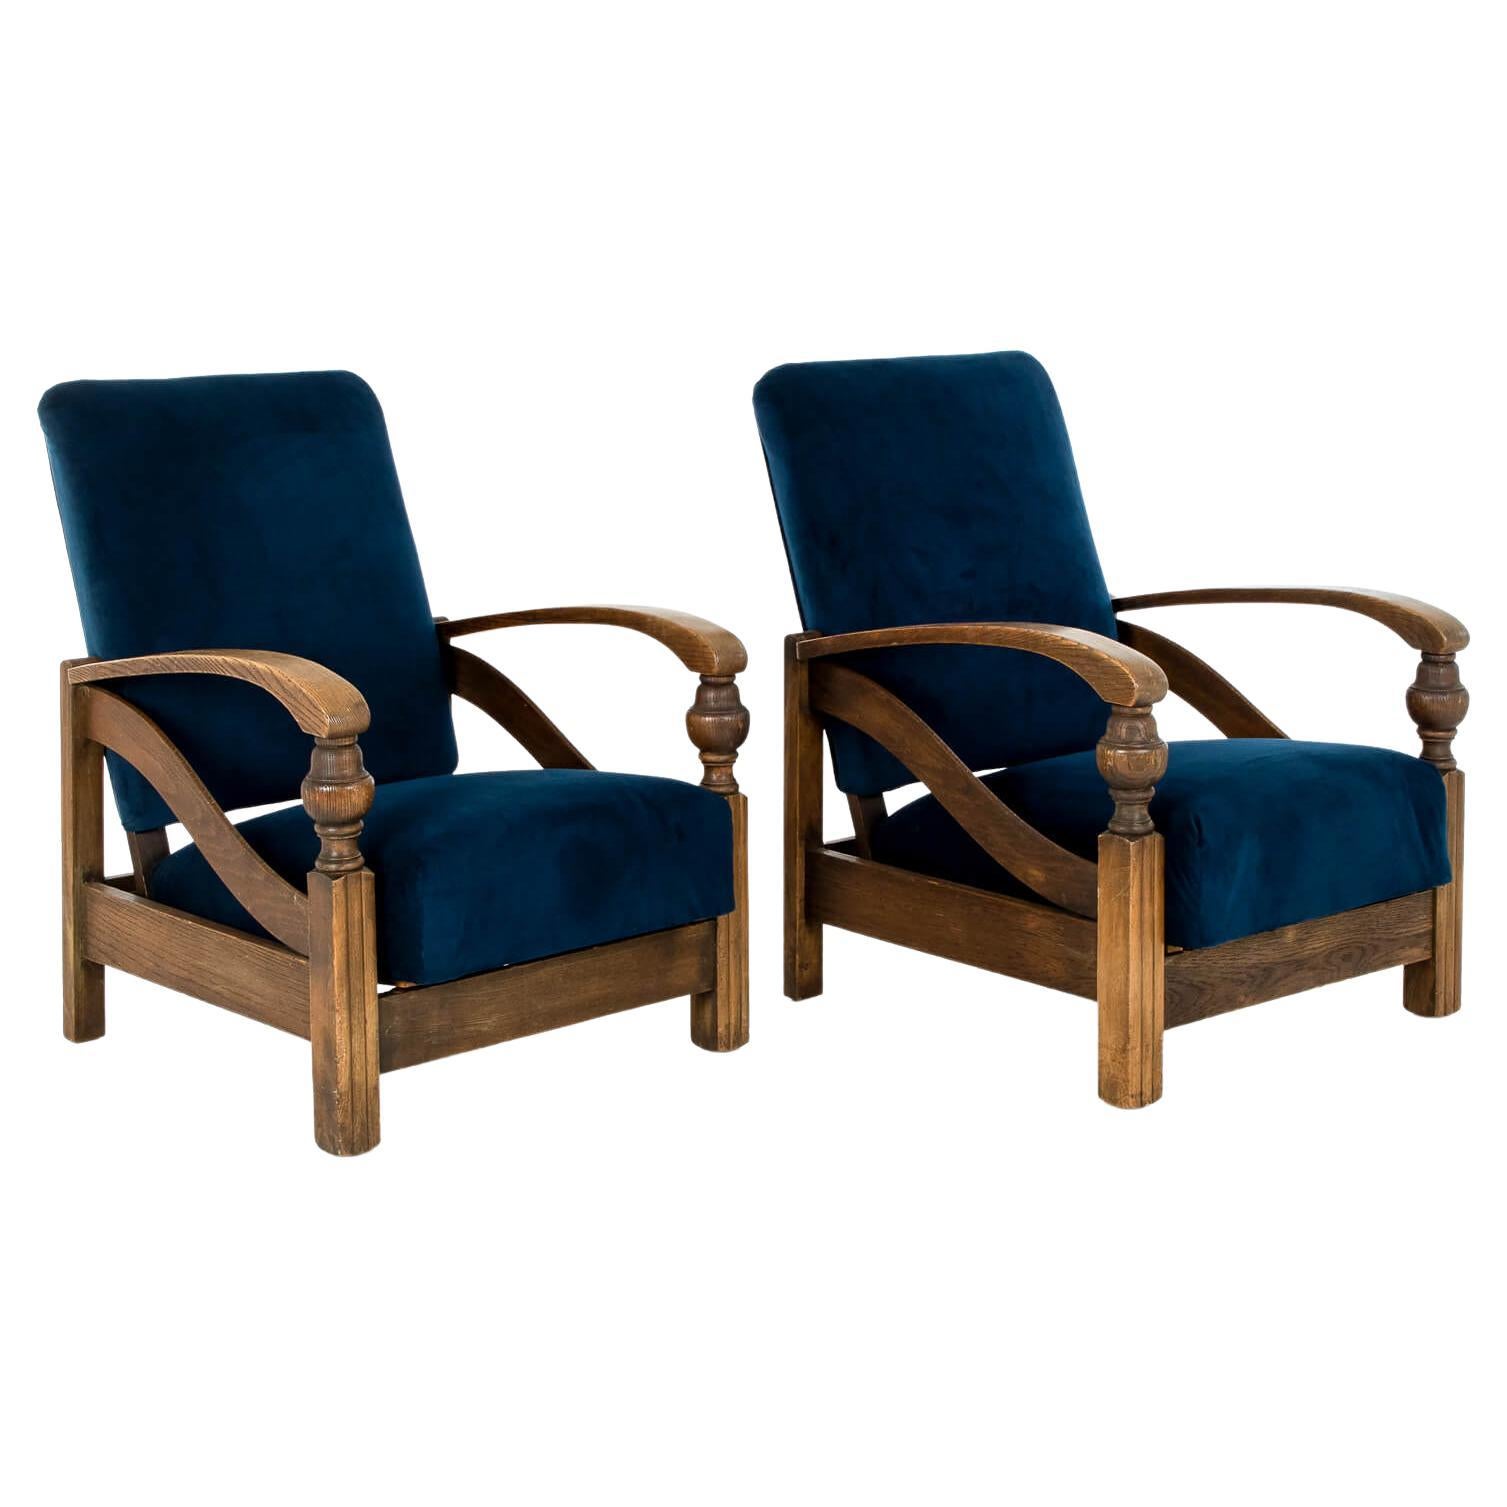 Pair of Art Deco Lounge Chairs For Sale